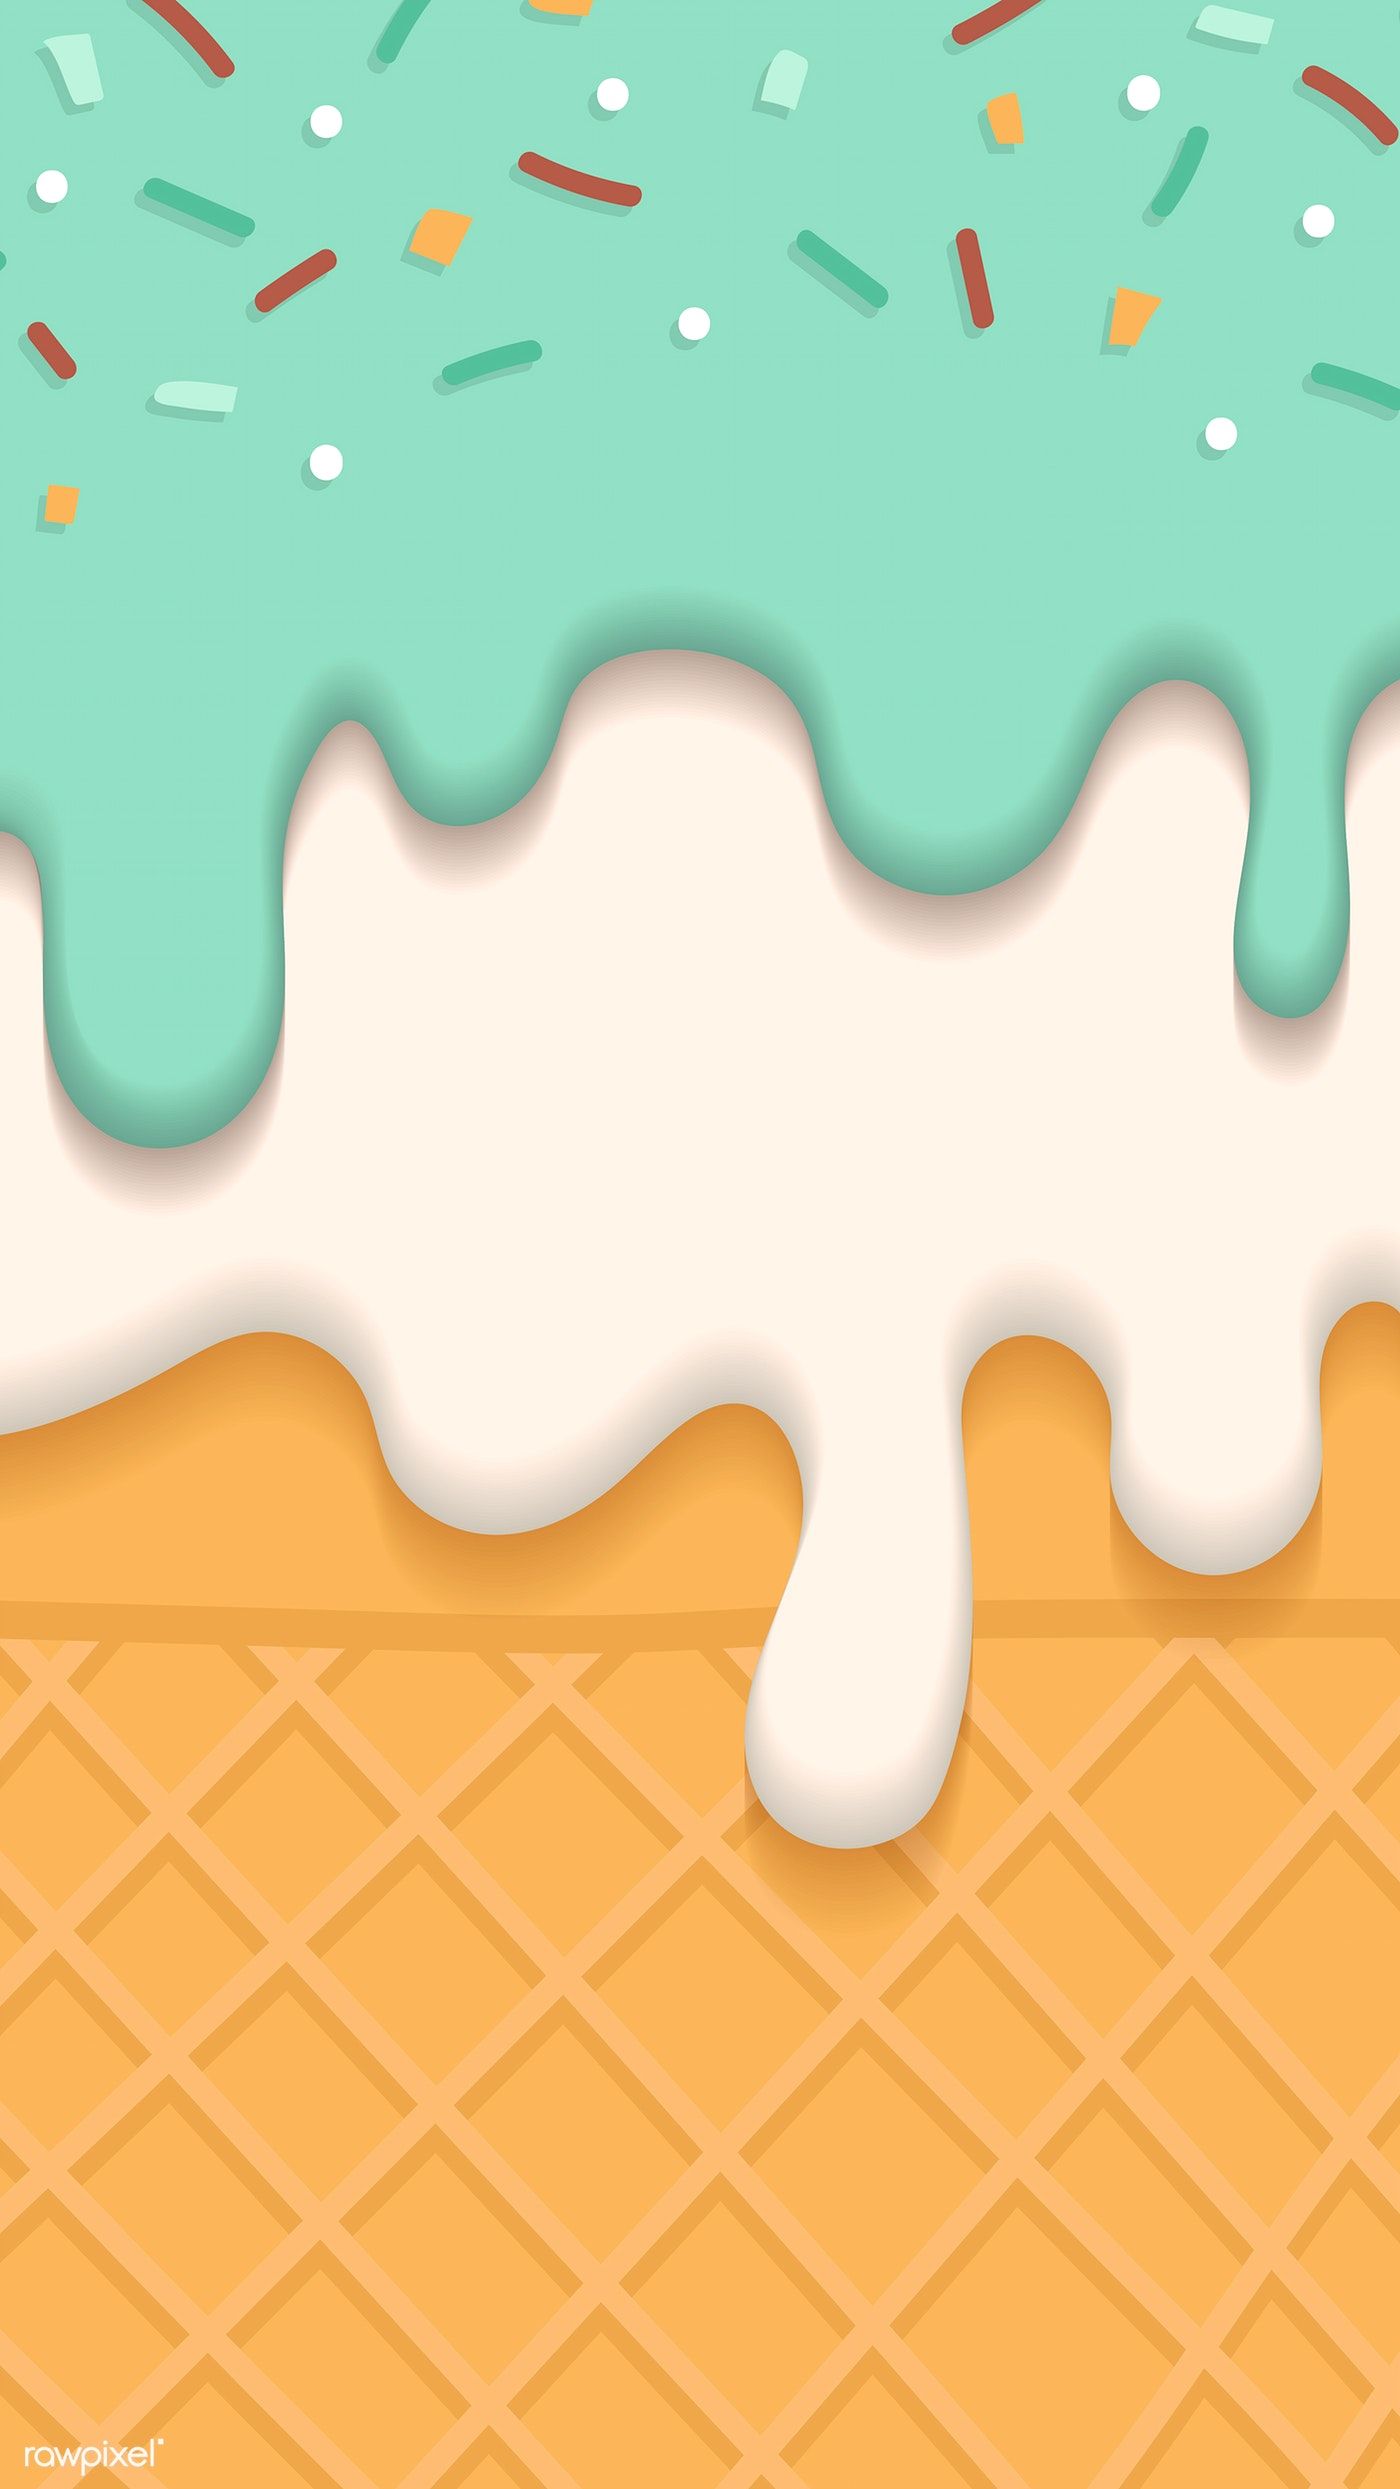 Download premium vector of Waffles with creamy ice cream  mobile phone wallpaper vector by Toon about iphone wallpaper, ice cream, cone ice cream, sprinkle background colorful, and candy phones 1226256